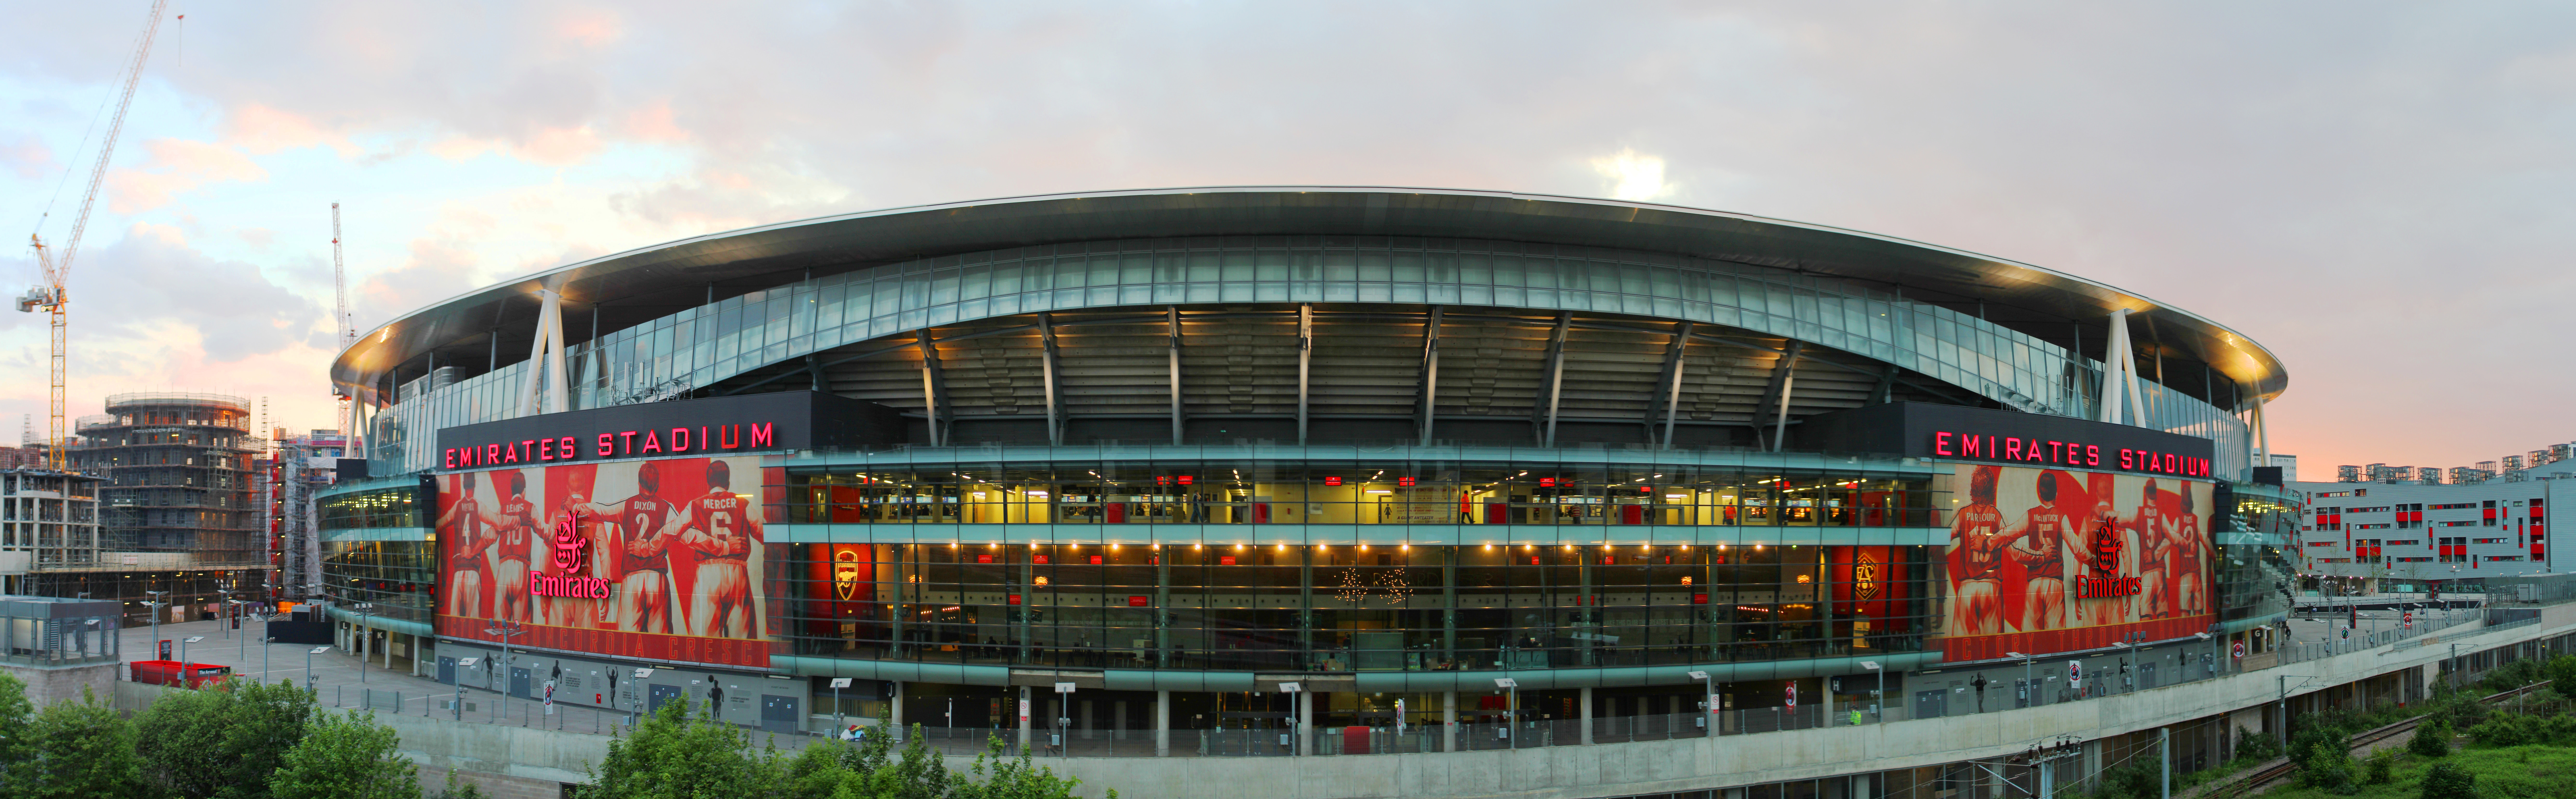 Arsenal Emirates Stadium Wallpaper For Twitter | Full HD Pictures